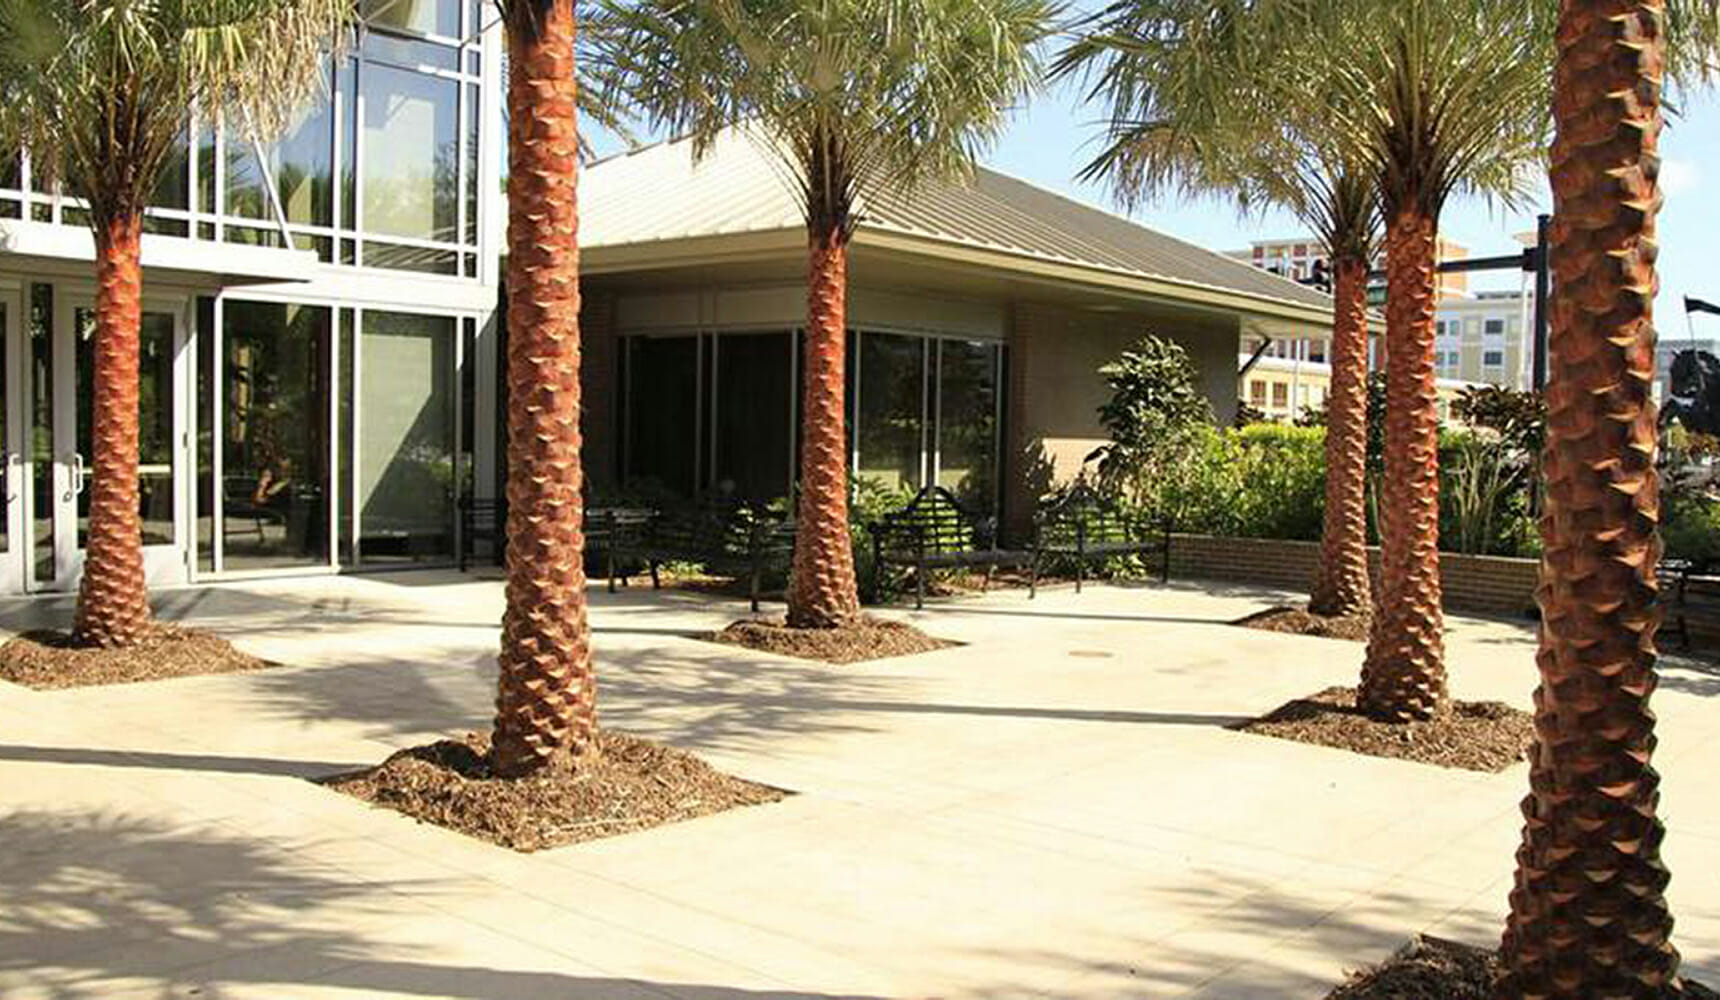 A group of palm trees in front of a building.